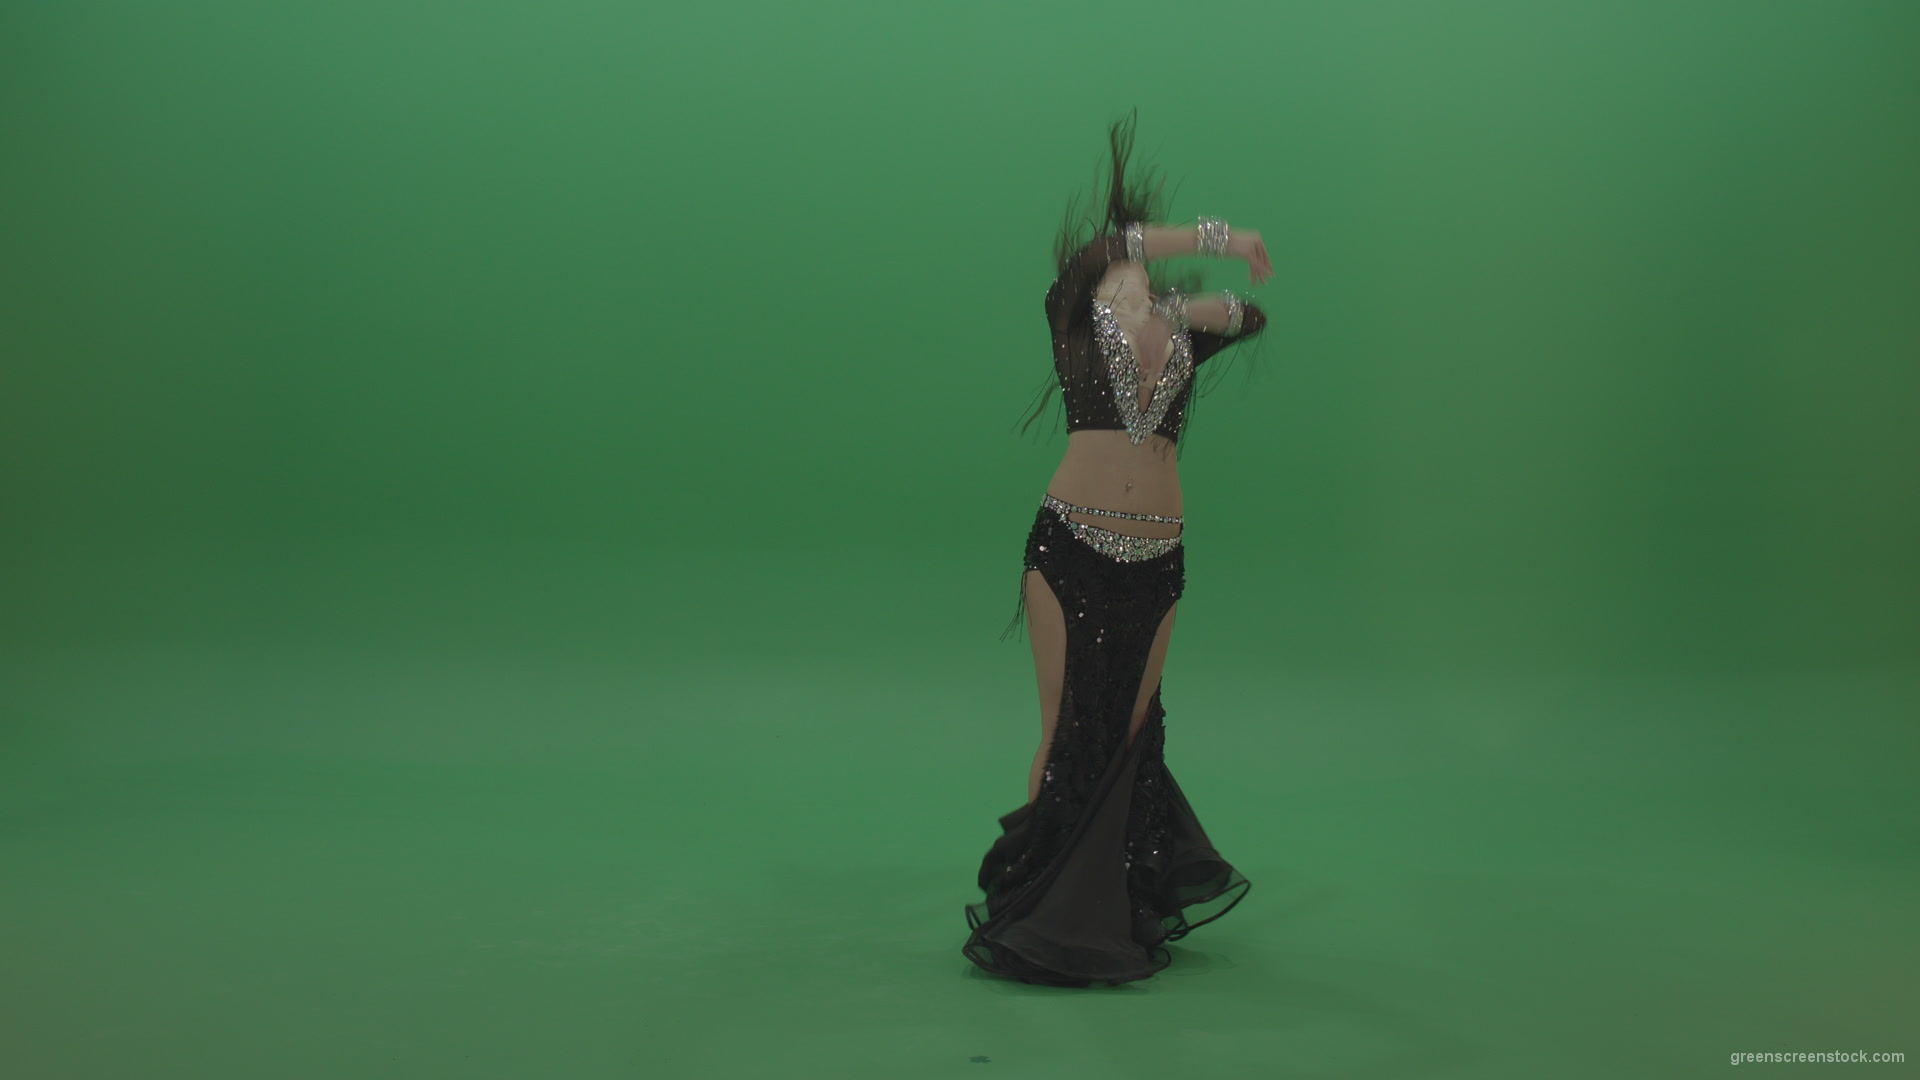 Appealing-belly-dancer-in-black-wear-display-amazing-dance-moves-over-chromakey-background_008 Green Screen Stock